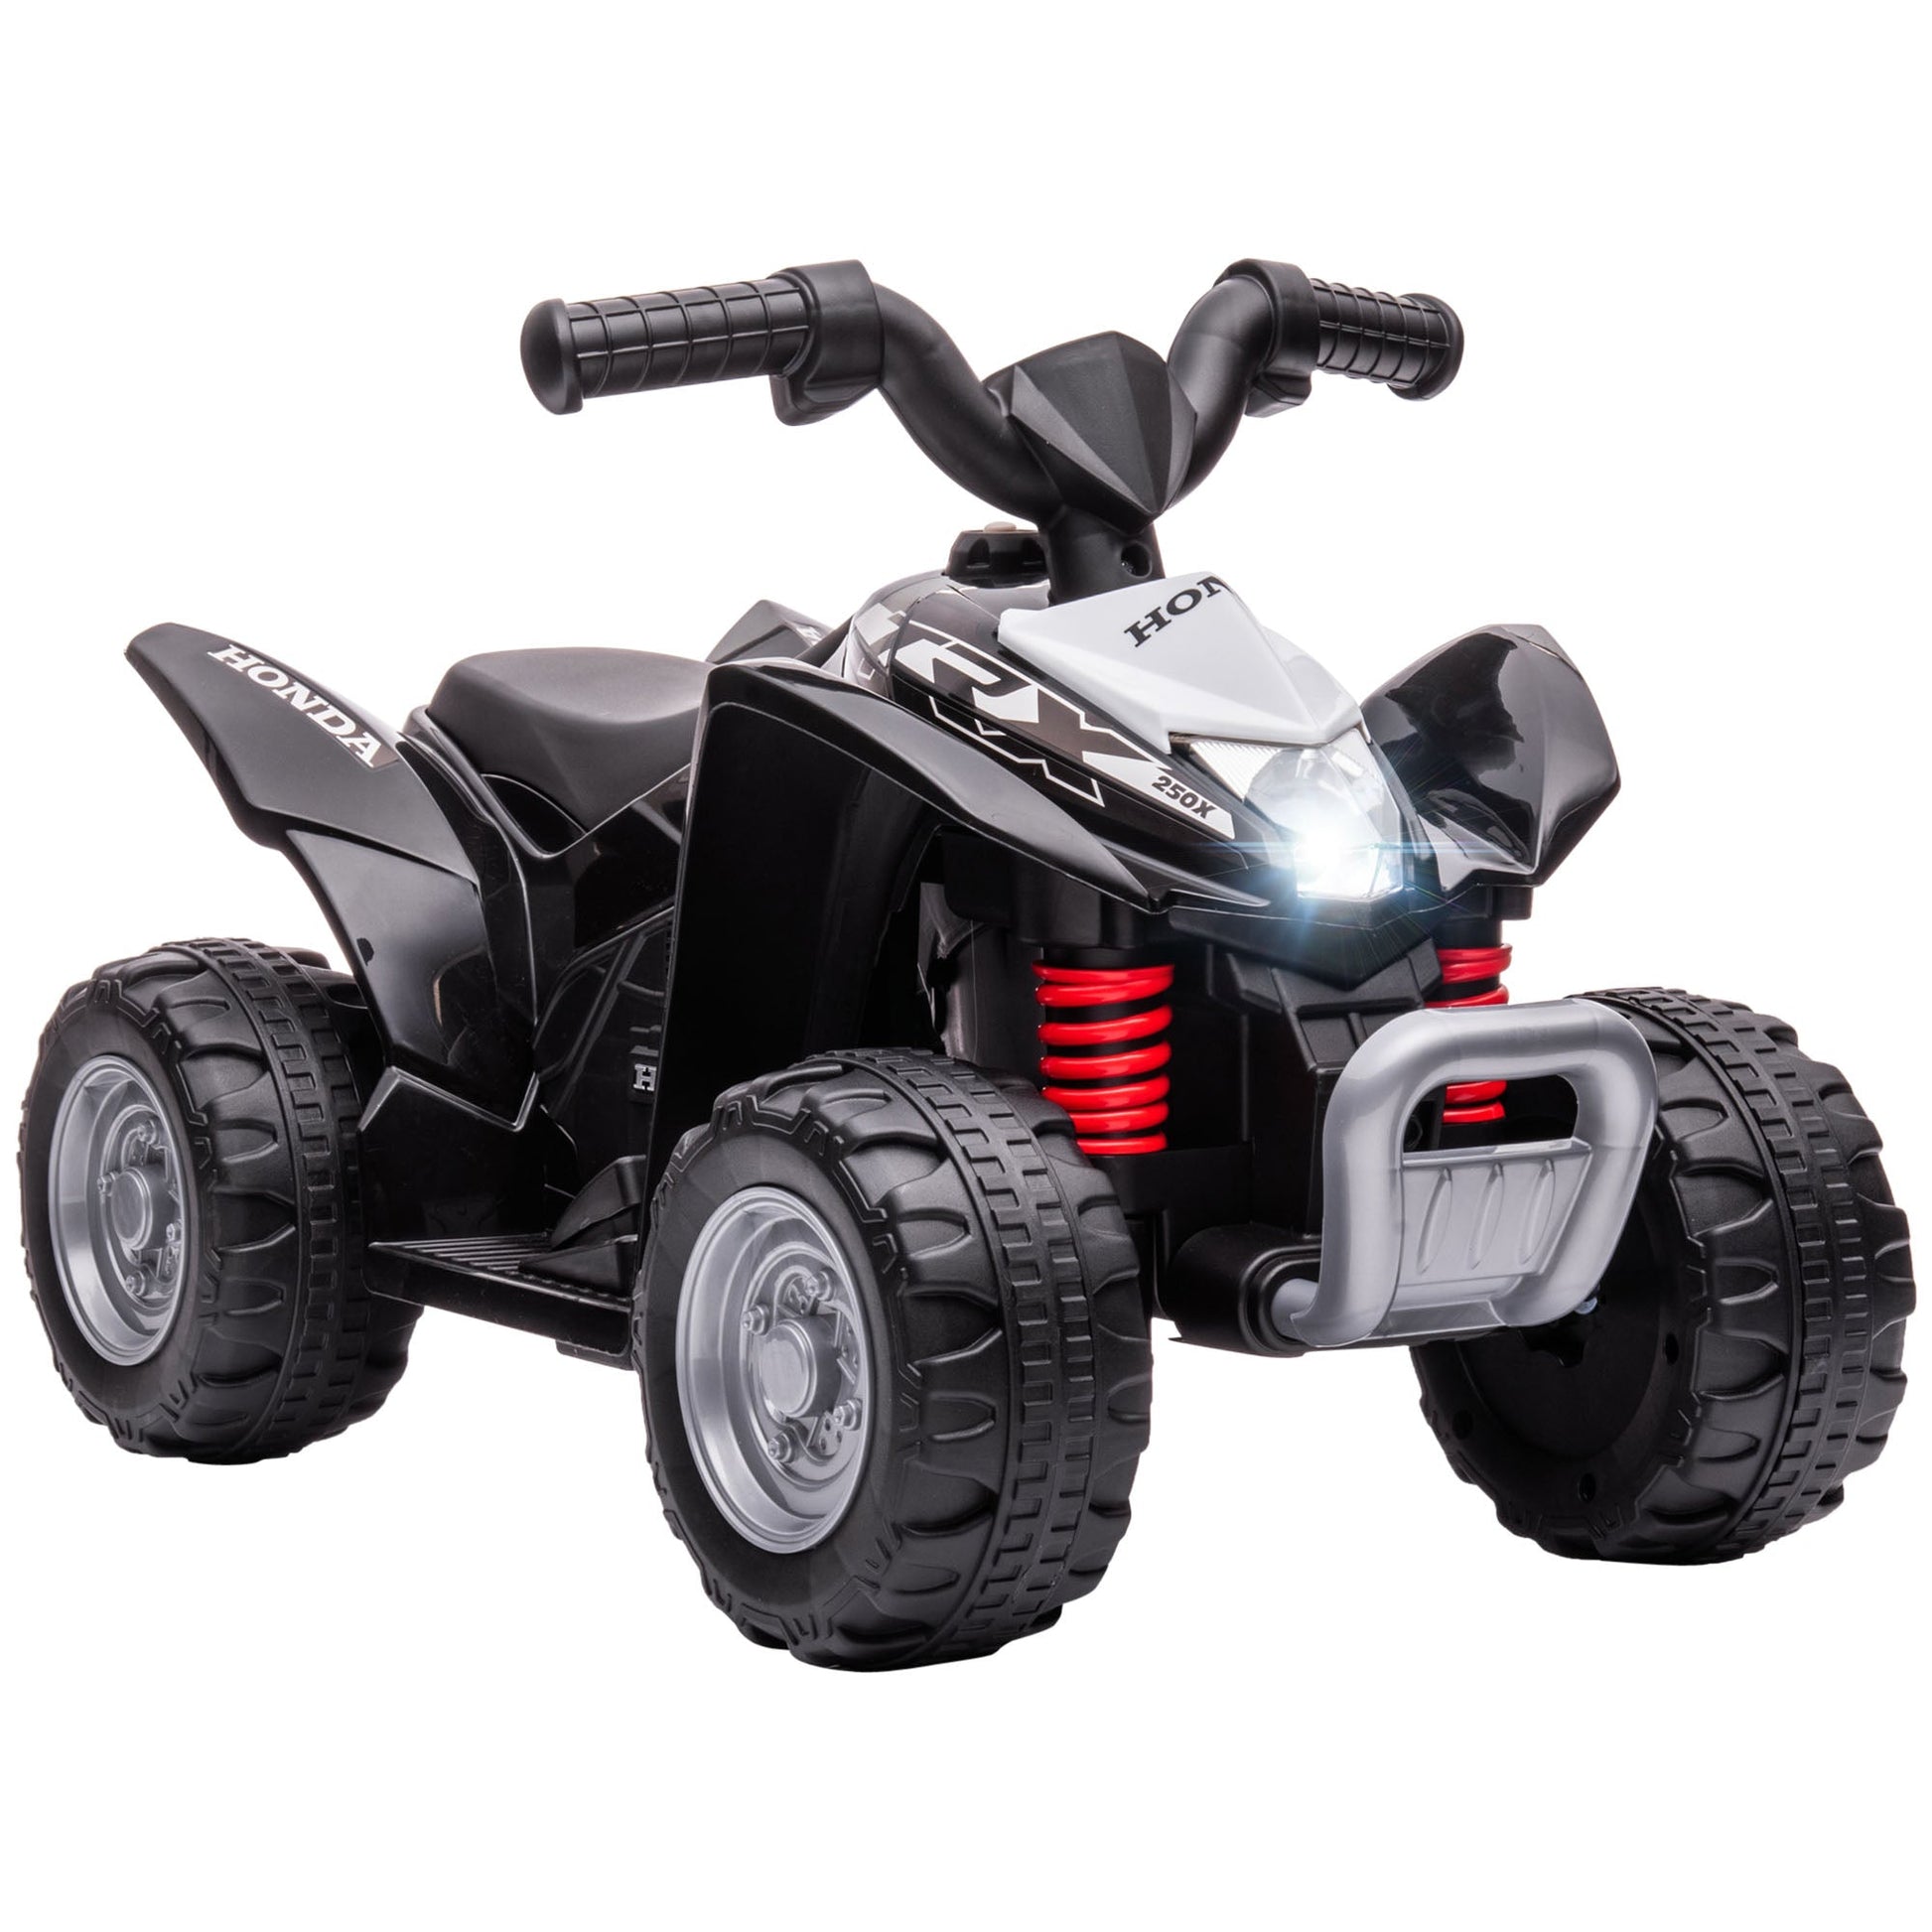 Maplin Plus AIYAPLAY Honda Licensed 6V Electric Ride On Kids Toy ATV Quad Bike with LED Lights & Horn for 1.5-3 Years - maplin.co.uk